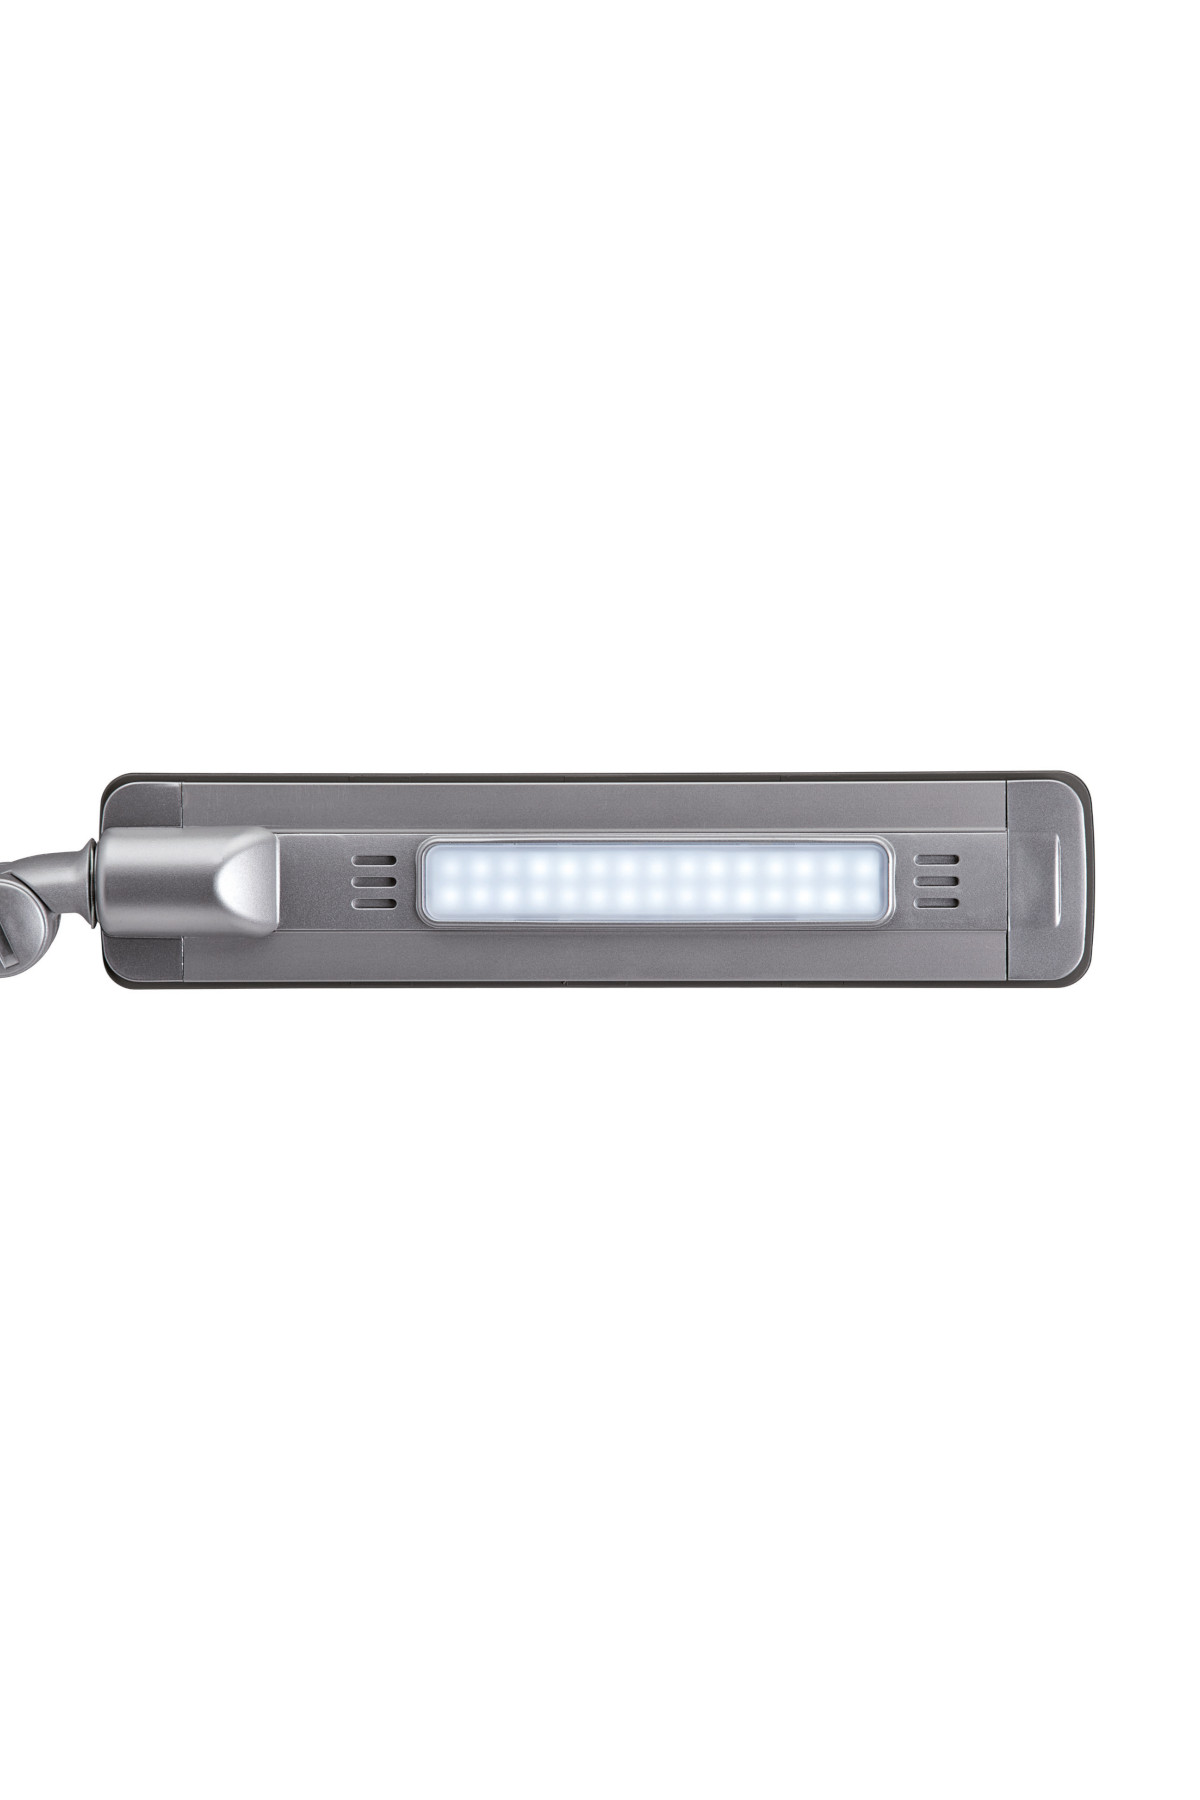 LED-Tischleuchte MAULpure, dimmbar, USB-Port in silber